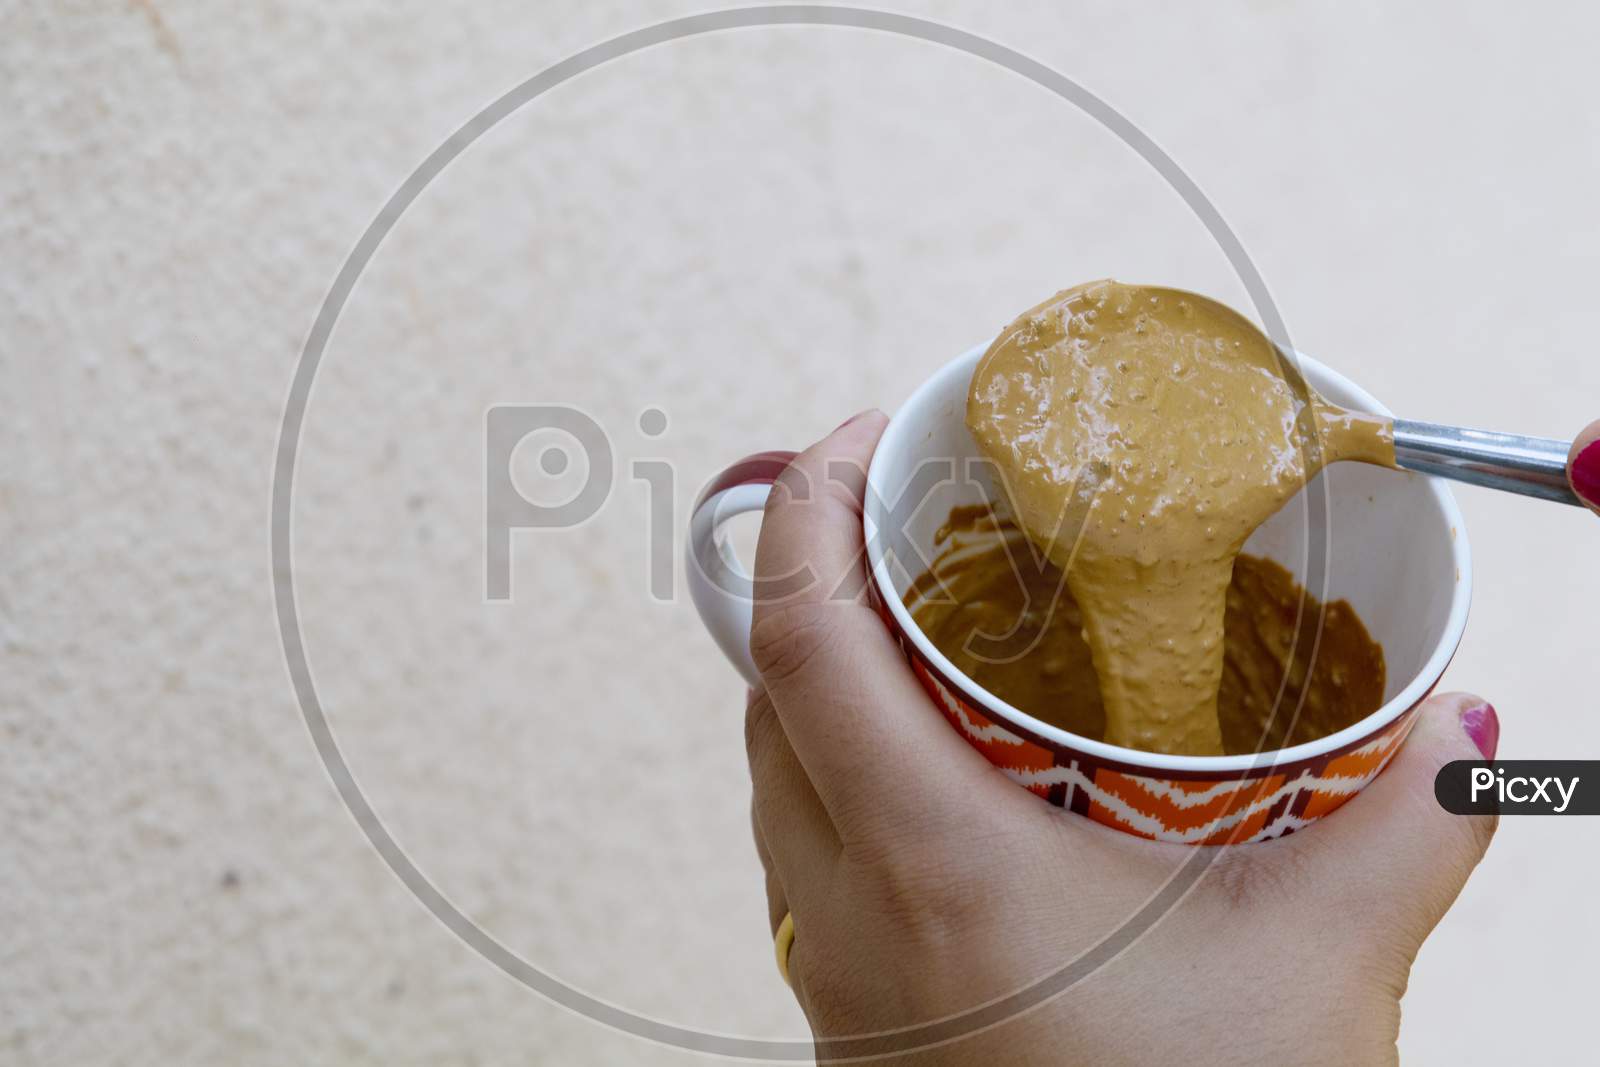 A Girl Showing Thick Hand Beaten Coffee Paste In A Colorful Mug Against Plain Wall Background